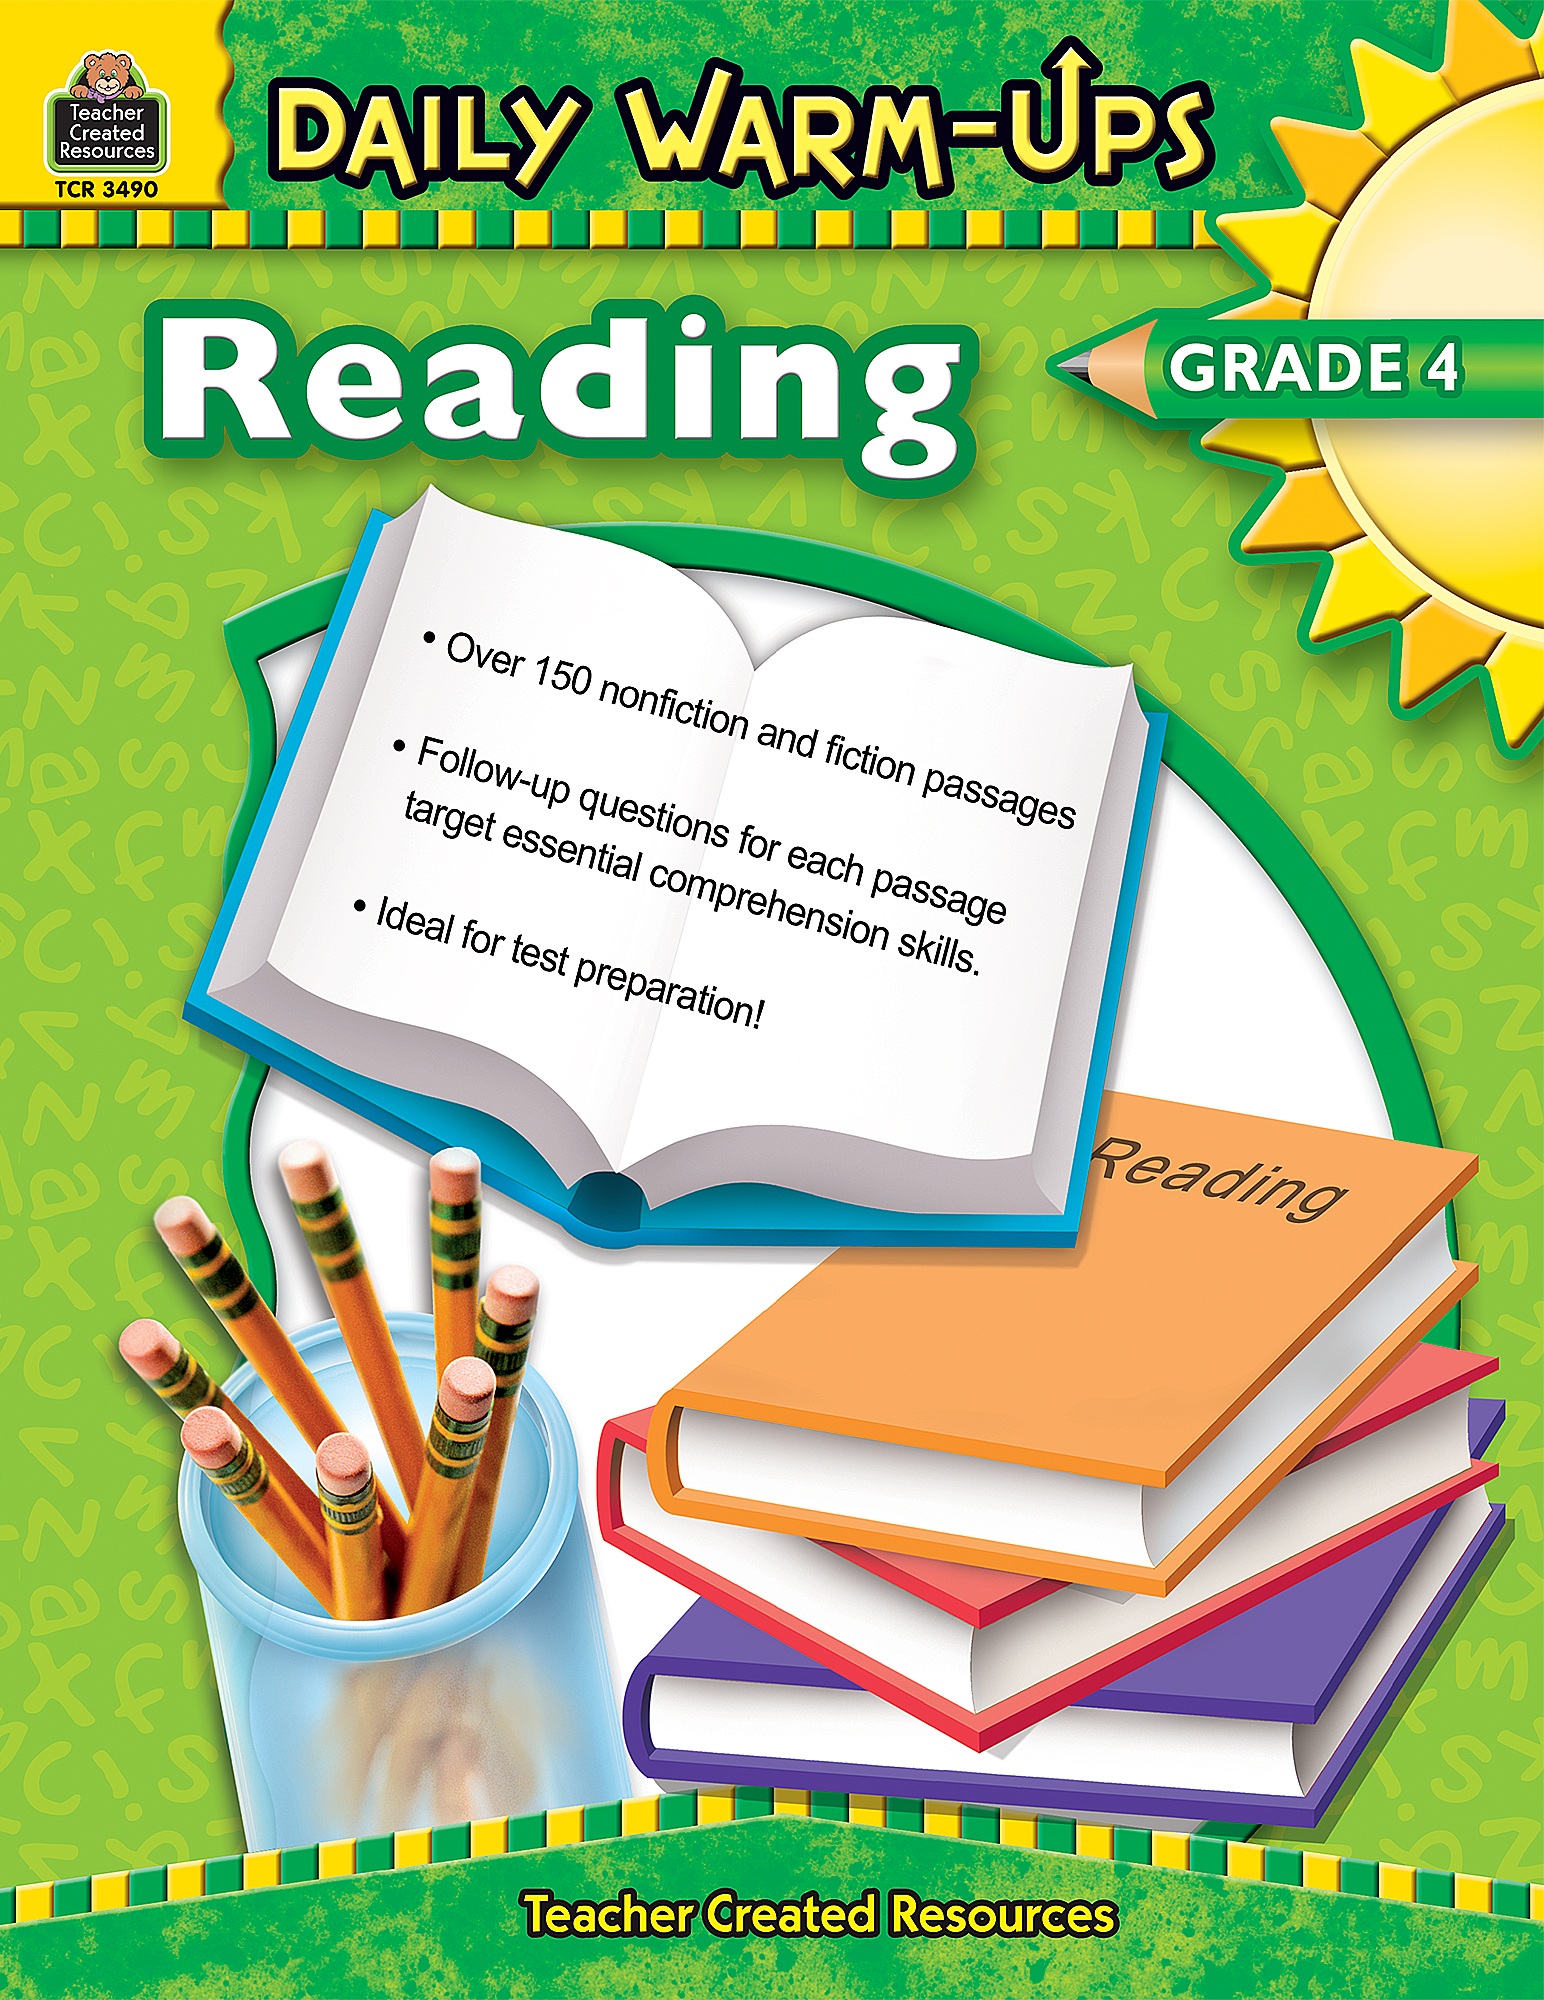 Daily Warm-Ups: Reading, Grade 4 - TCR3490 | Teacher Created Resources